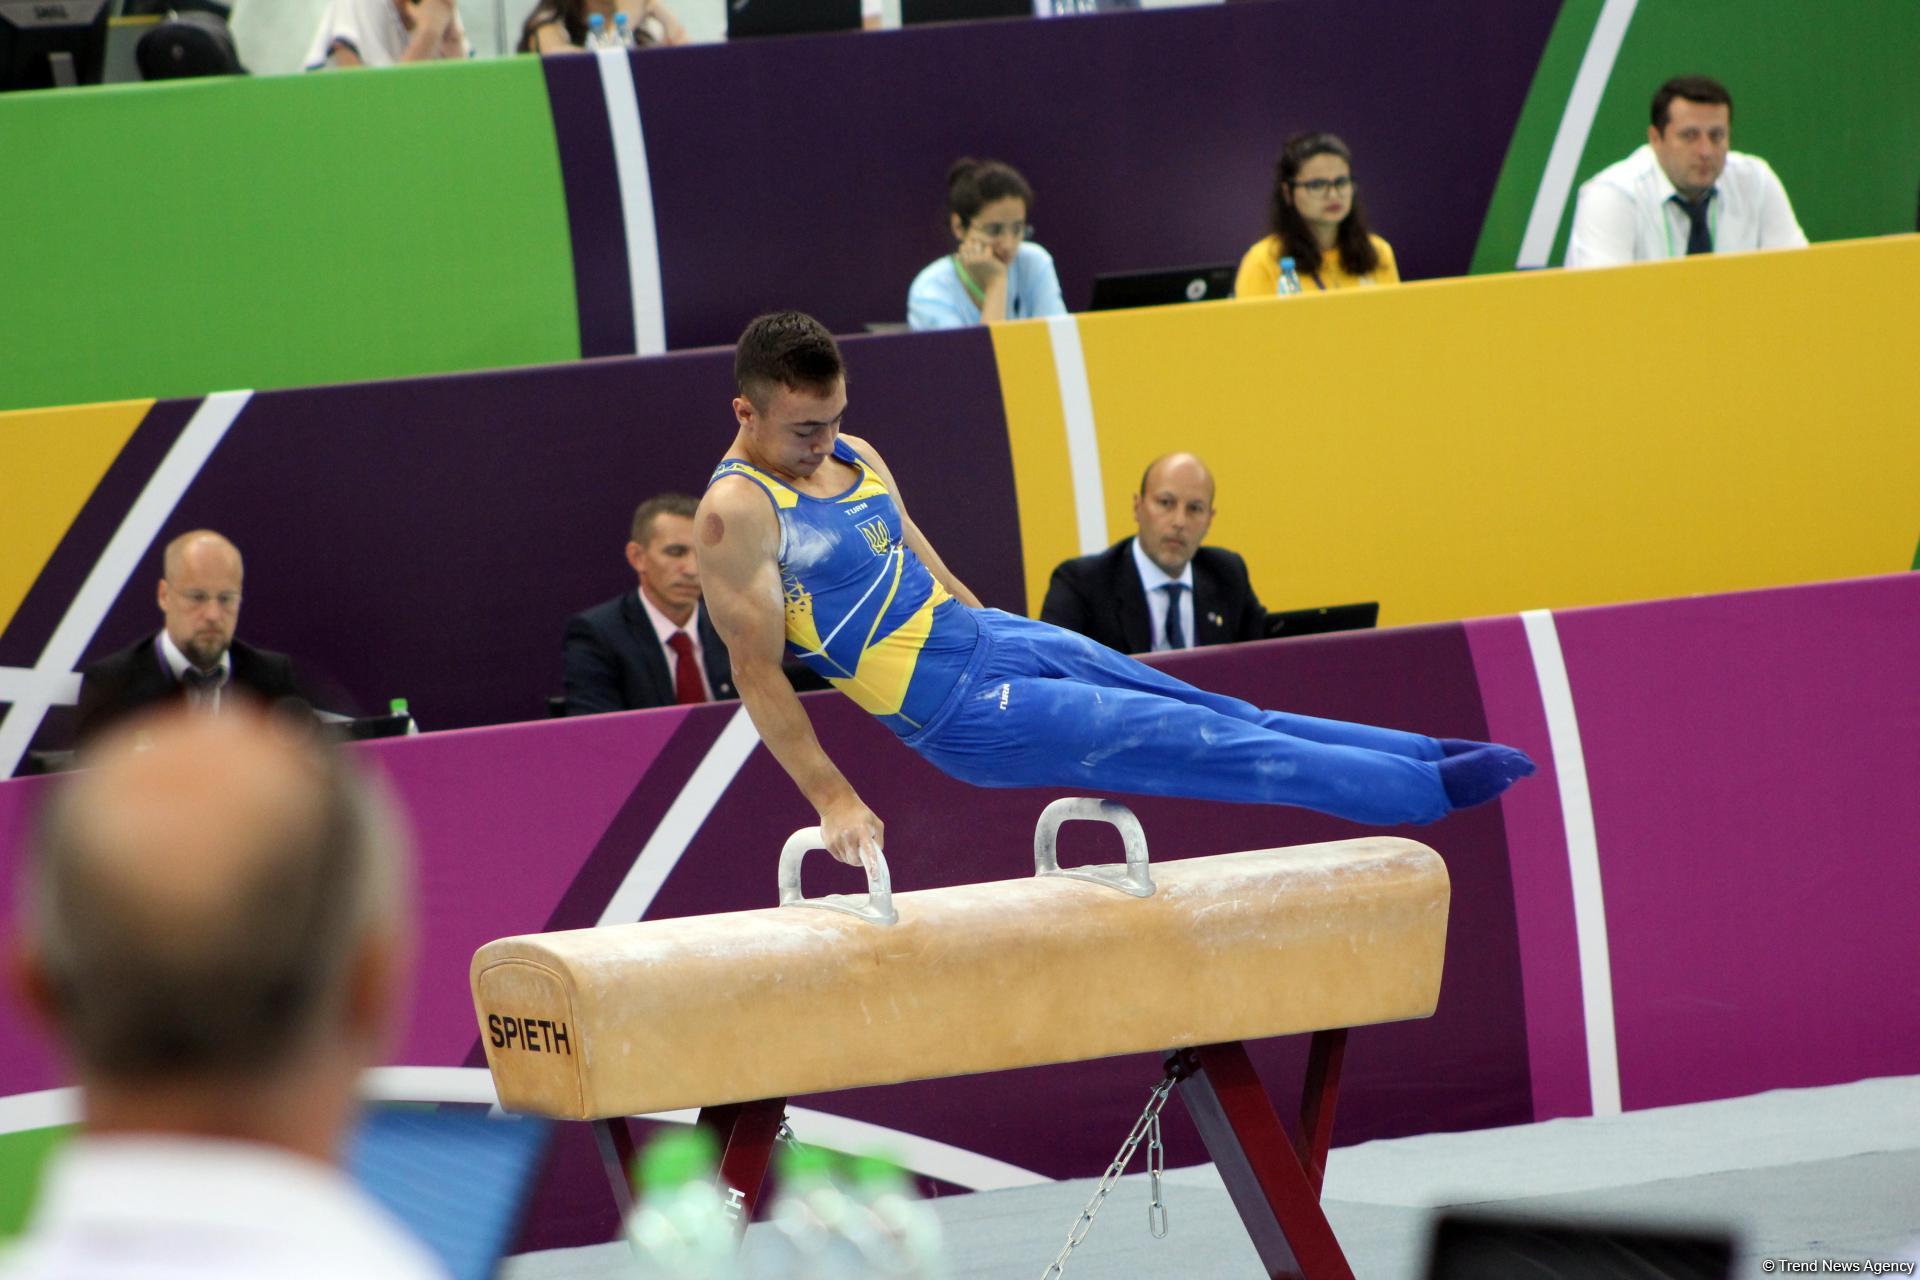 Fourth day of artistic gymnastics competitions kick off as part of EYOF Baku 2019 (PHOTO)